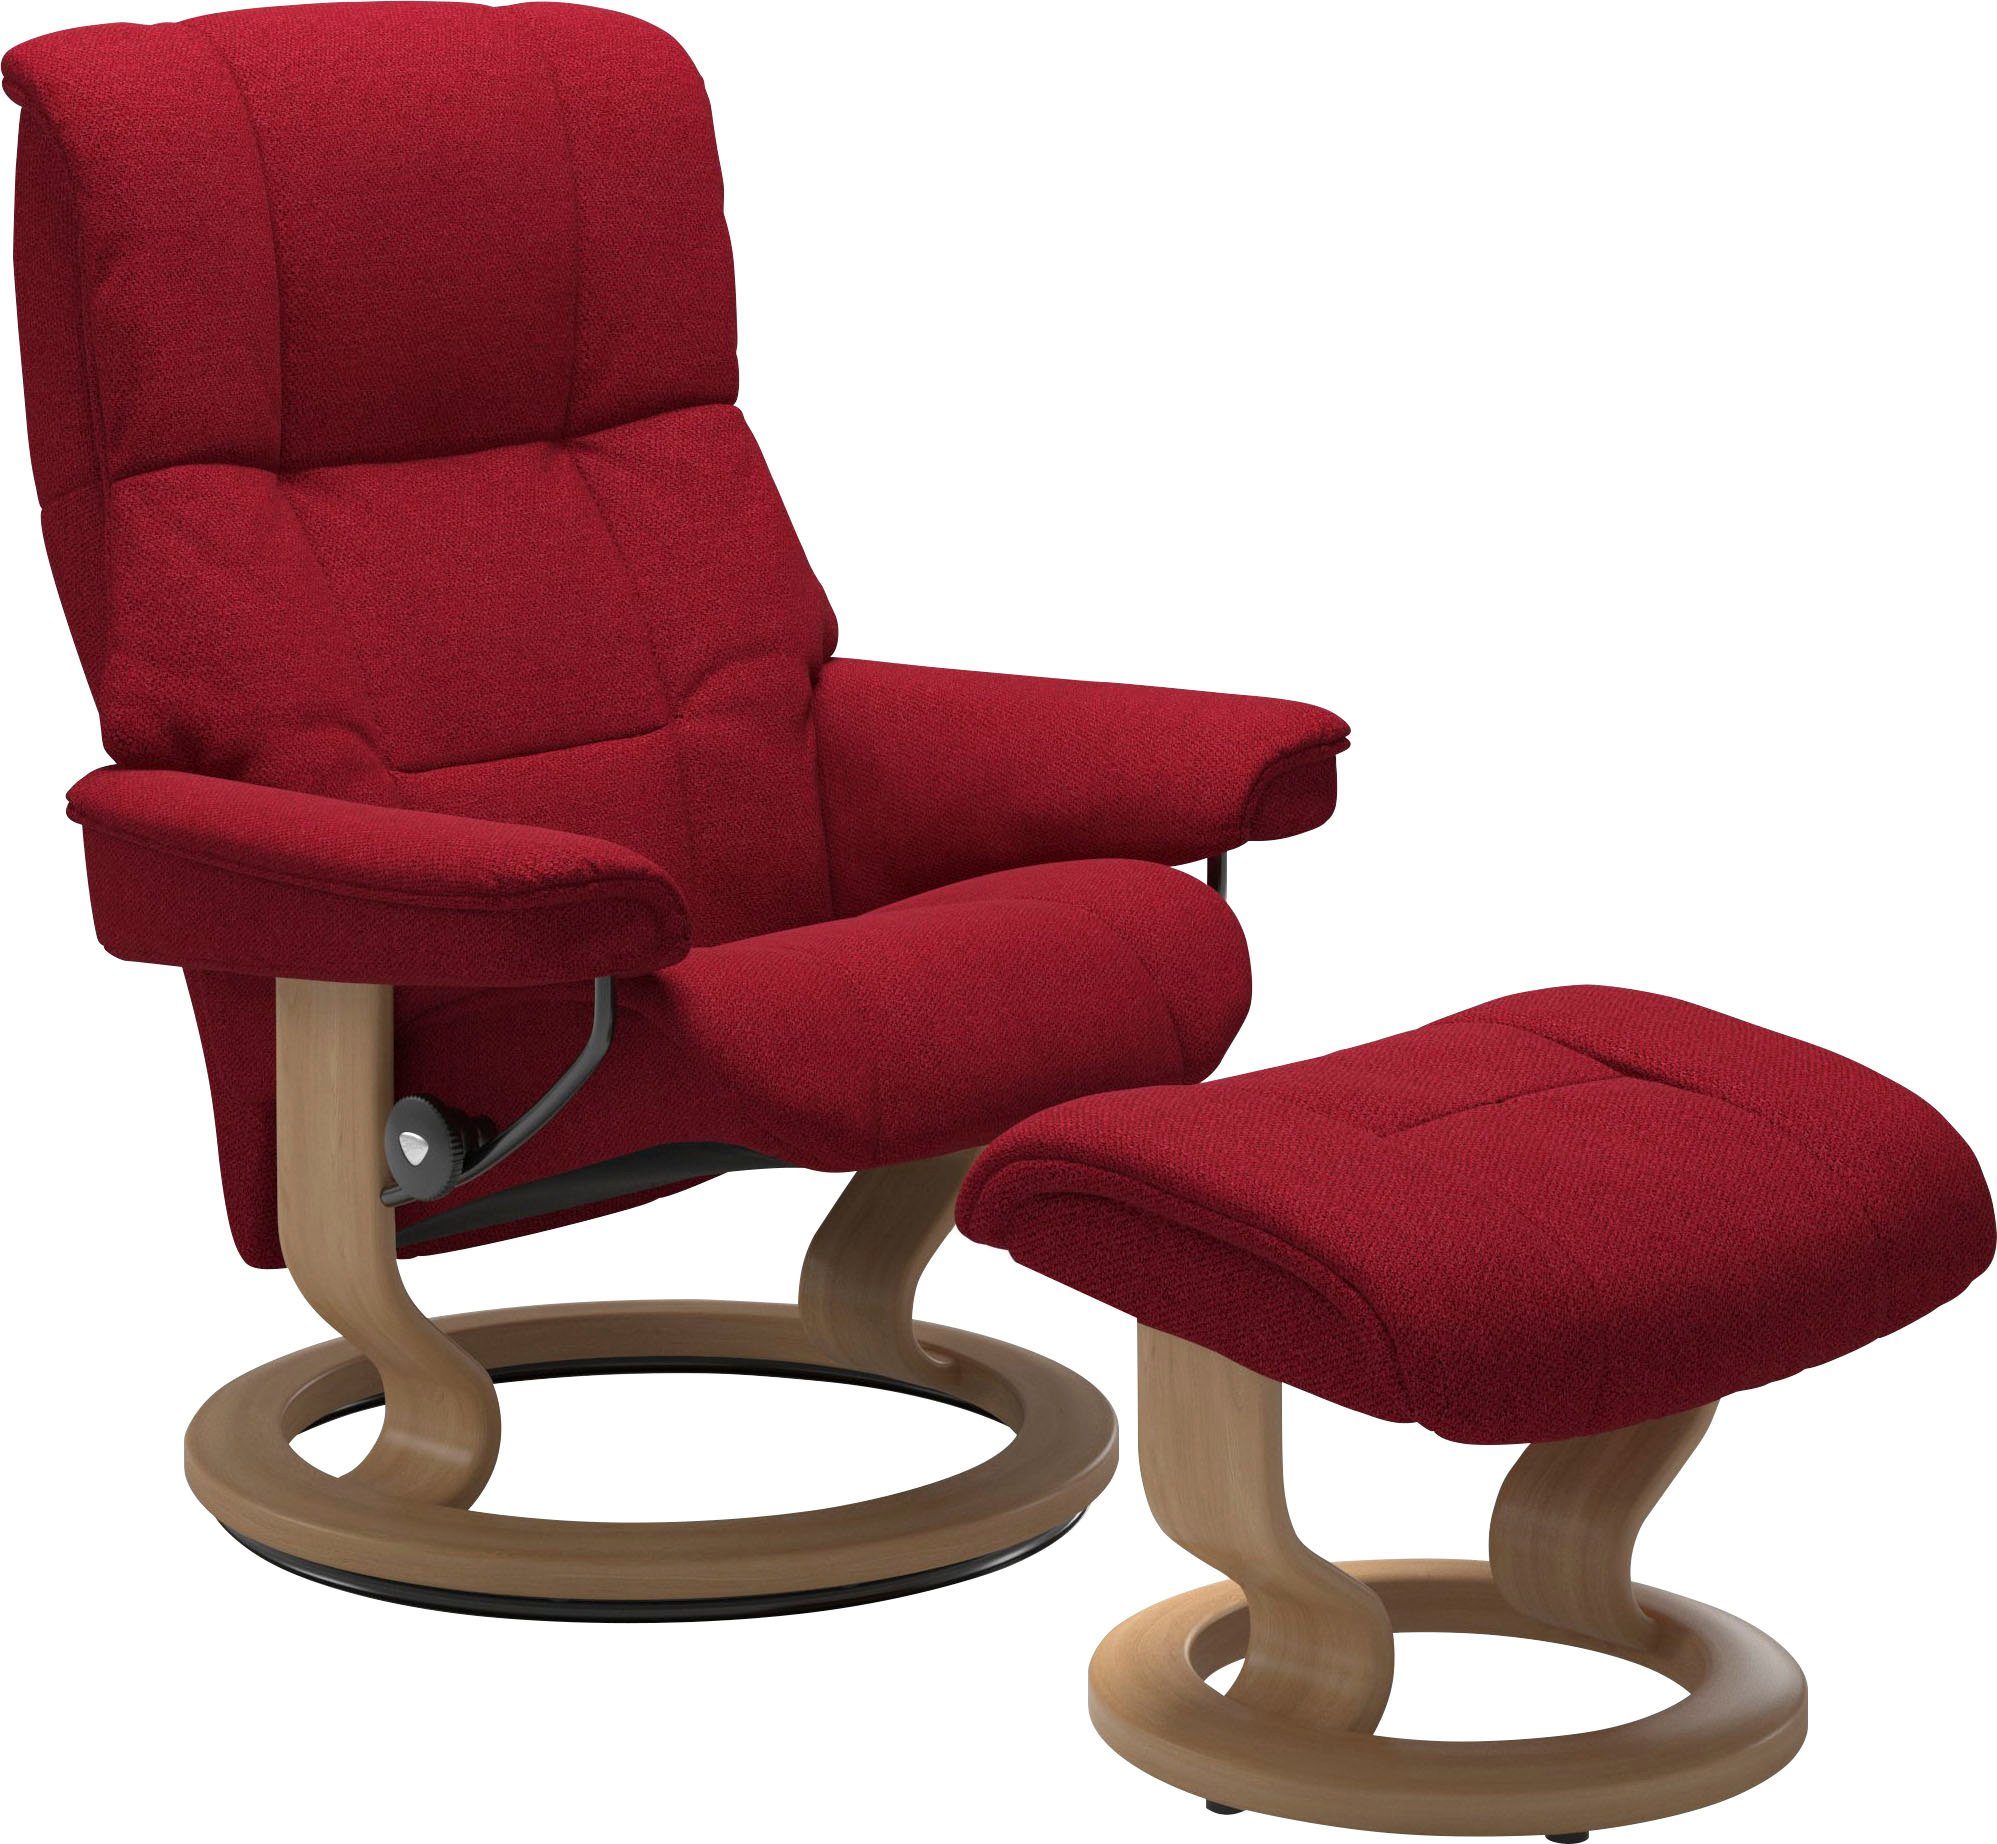 S, Gestell Relaxsessel M Classic Base, mit Mayfair Eiche & mit Größe Relaxsessel Hocker), L, Hocker, Stressless® mit (Set,